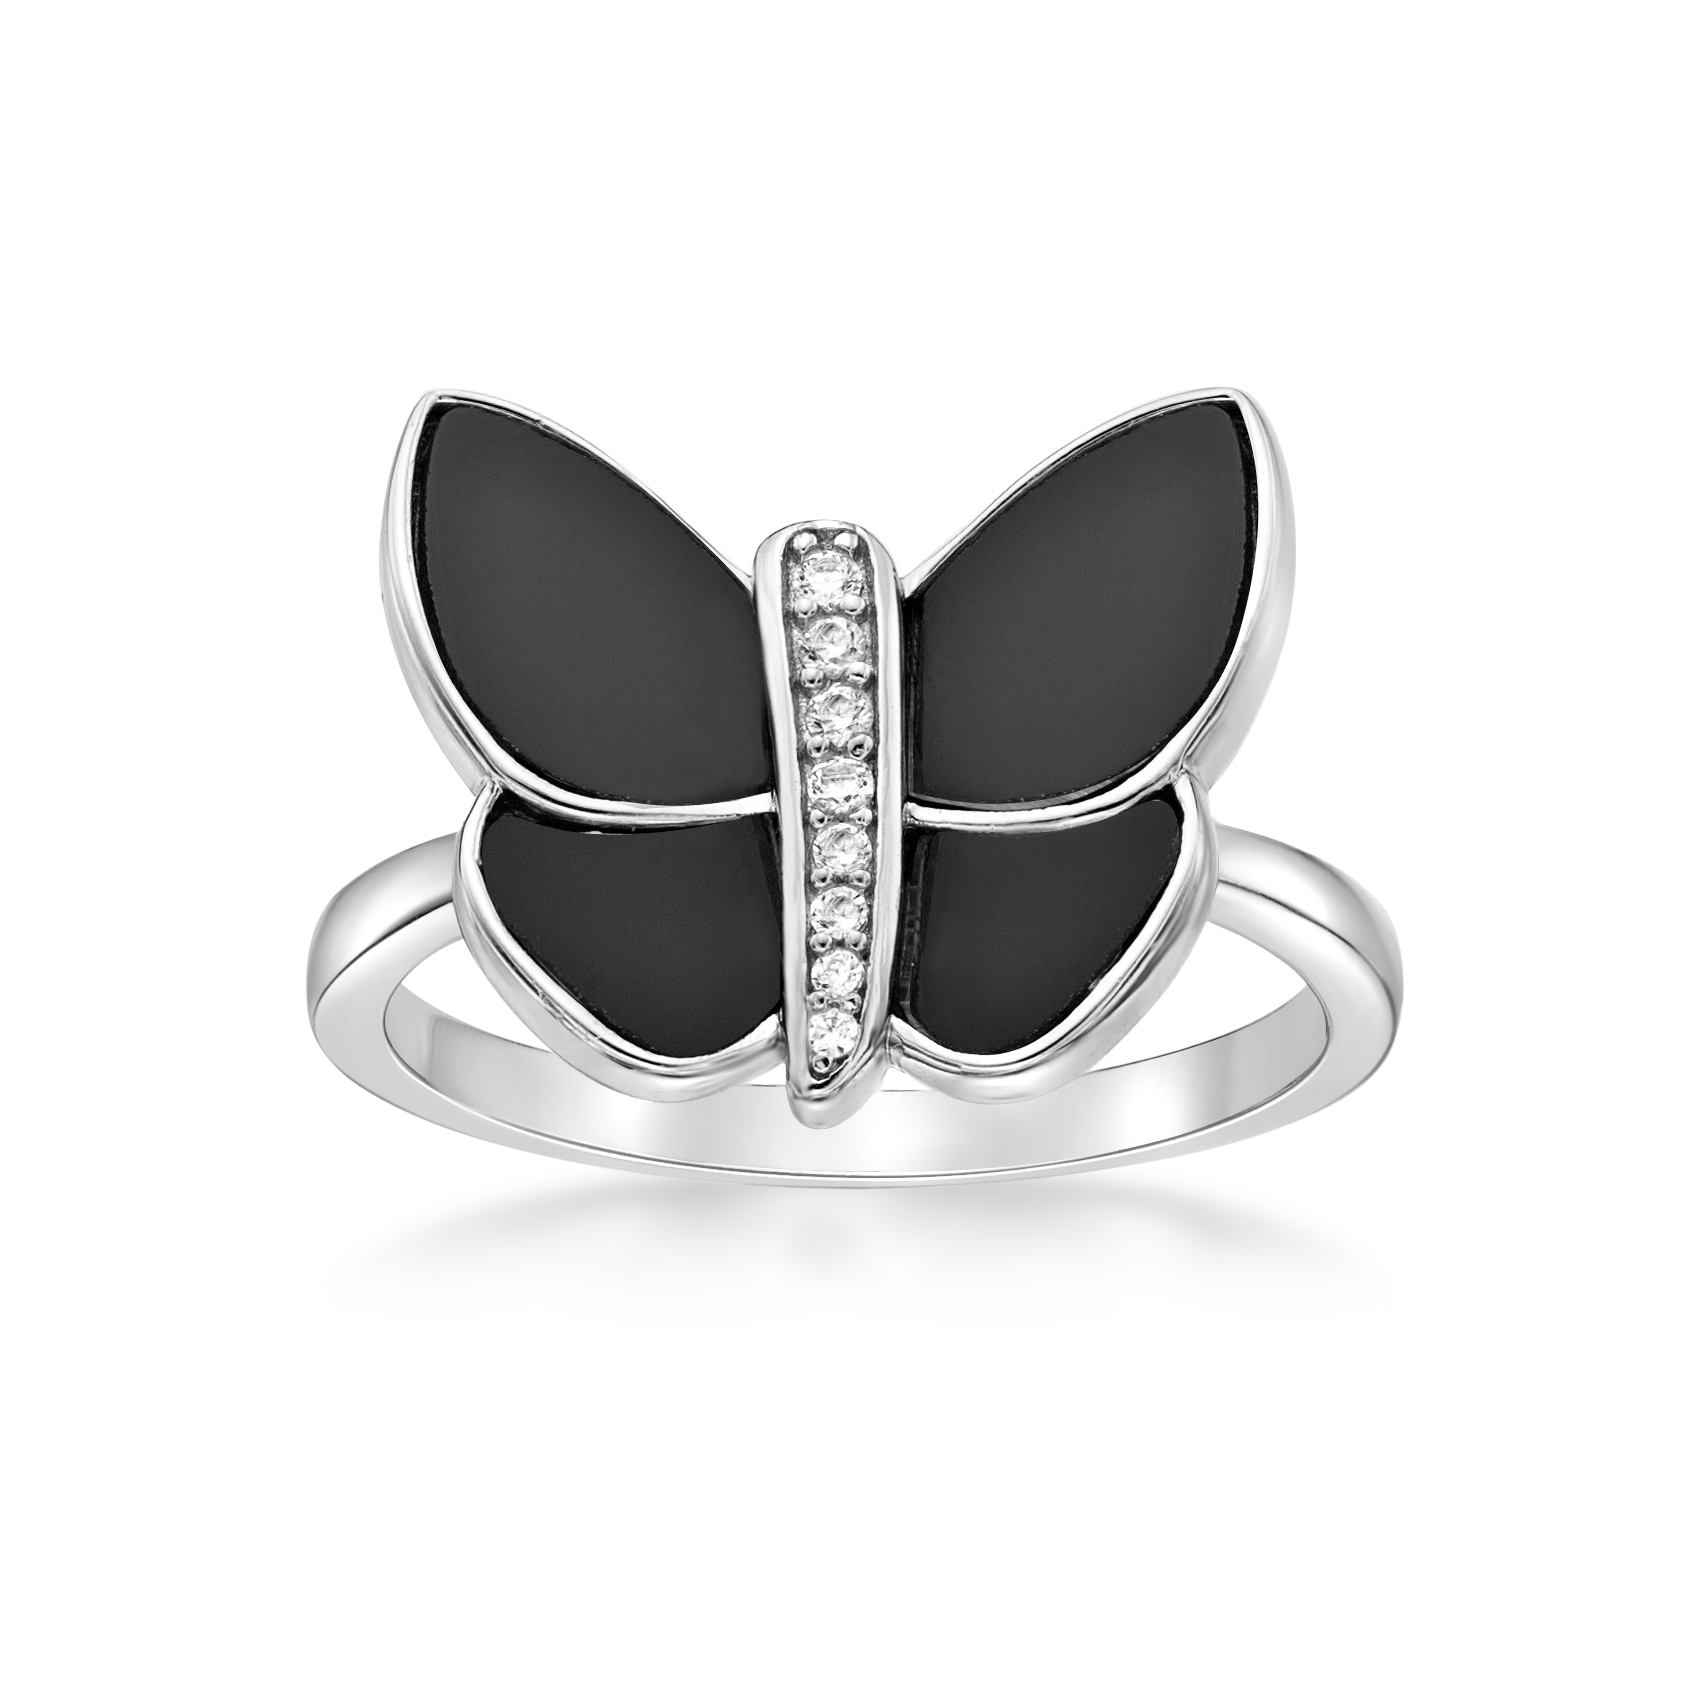 51164-ring-default-collection-sterling-silver-51164-1.jpg